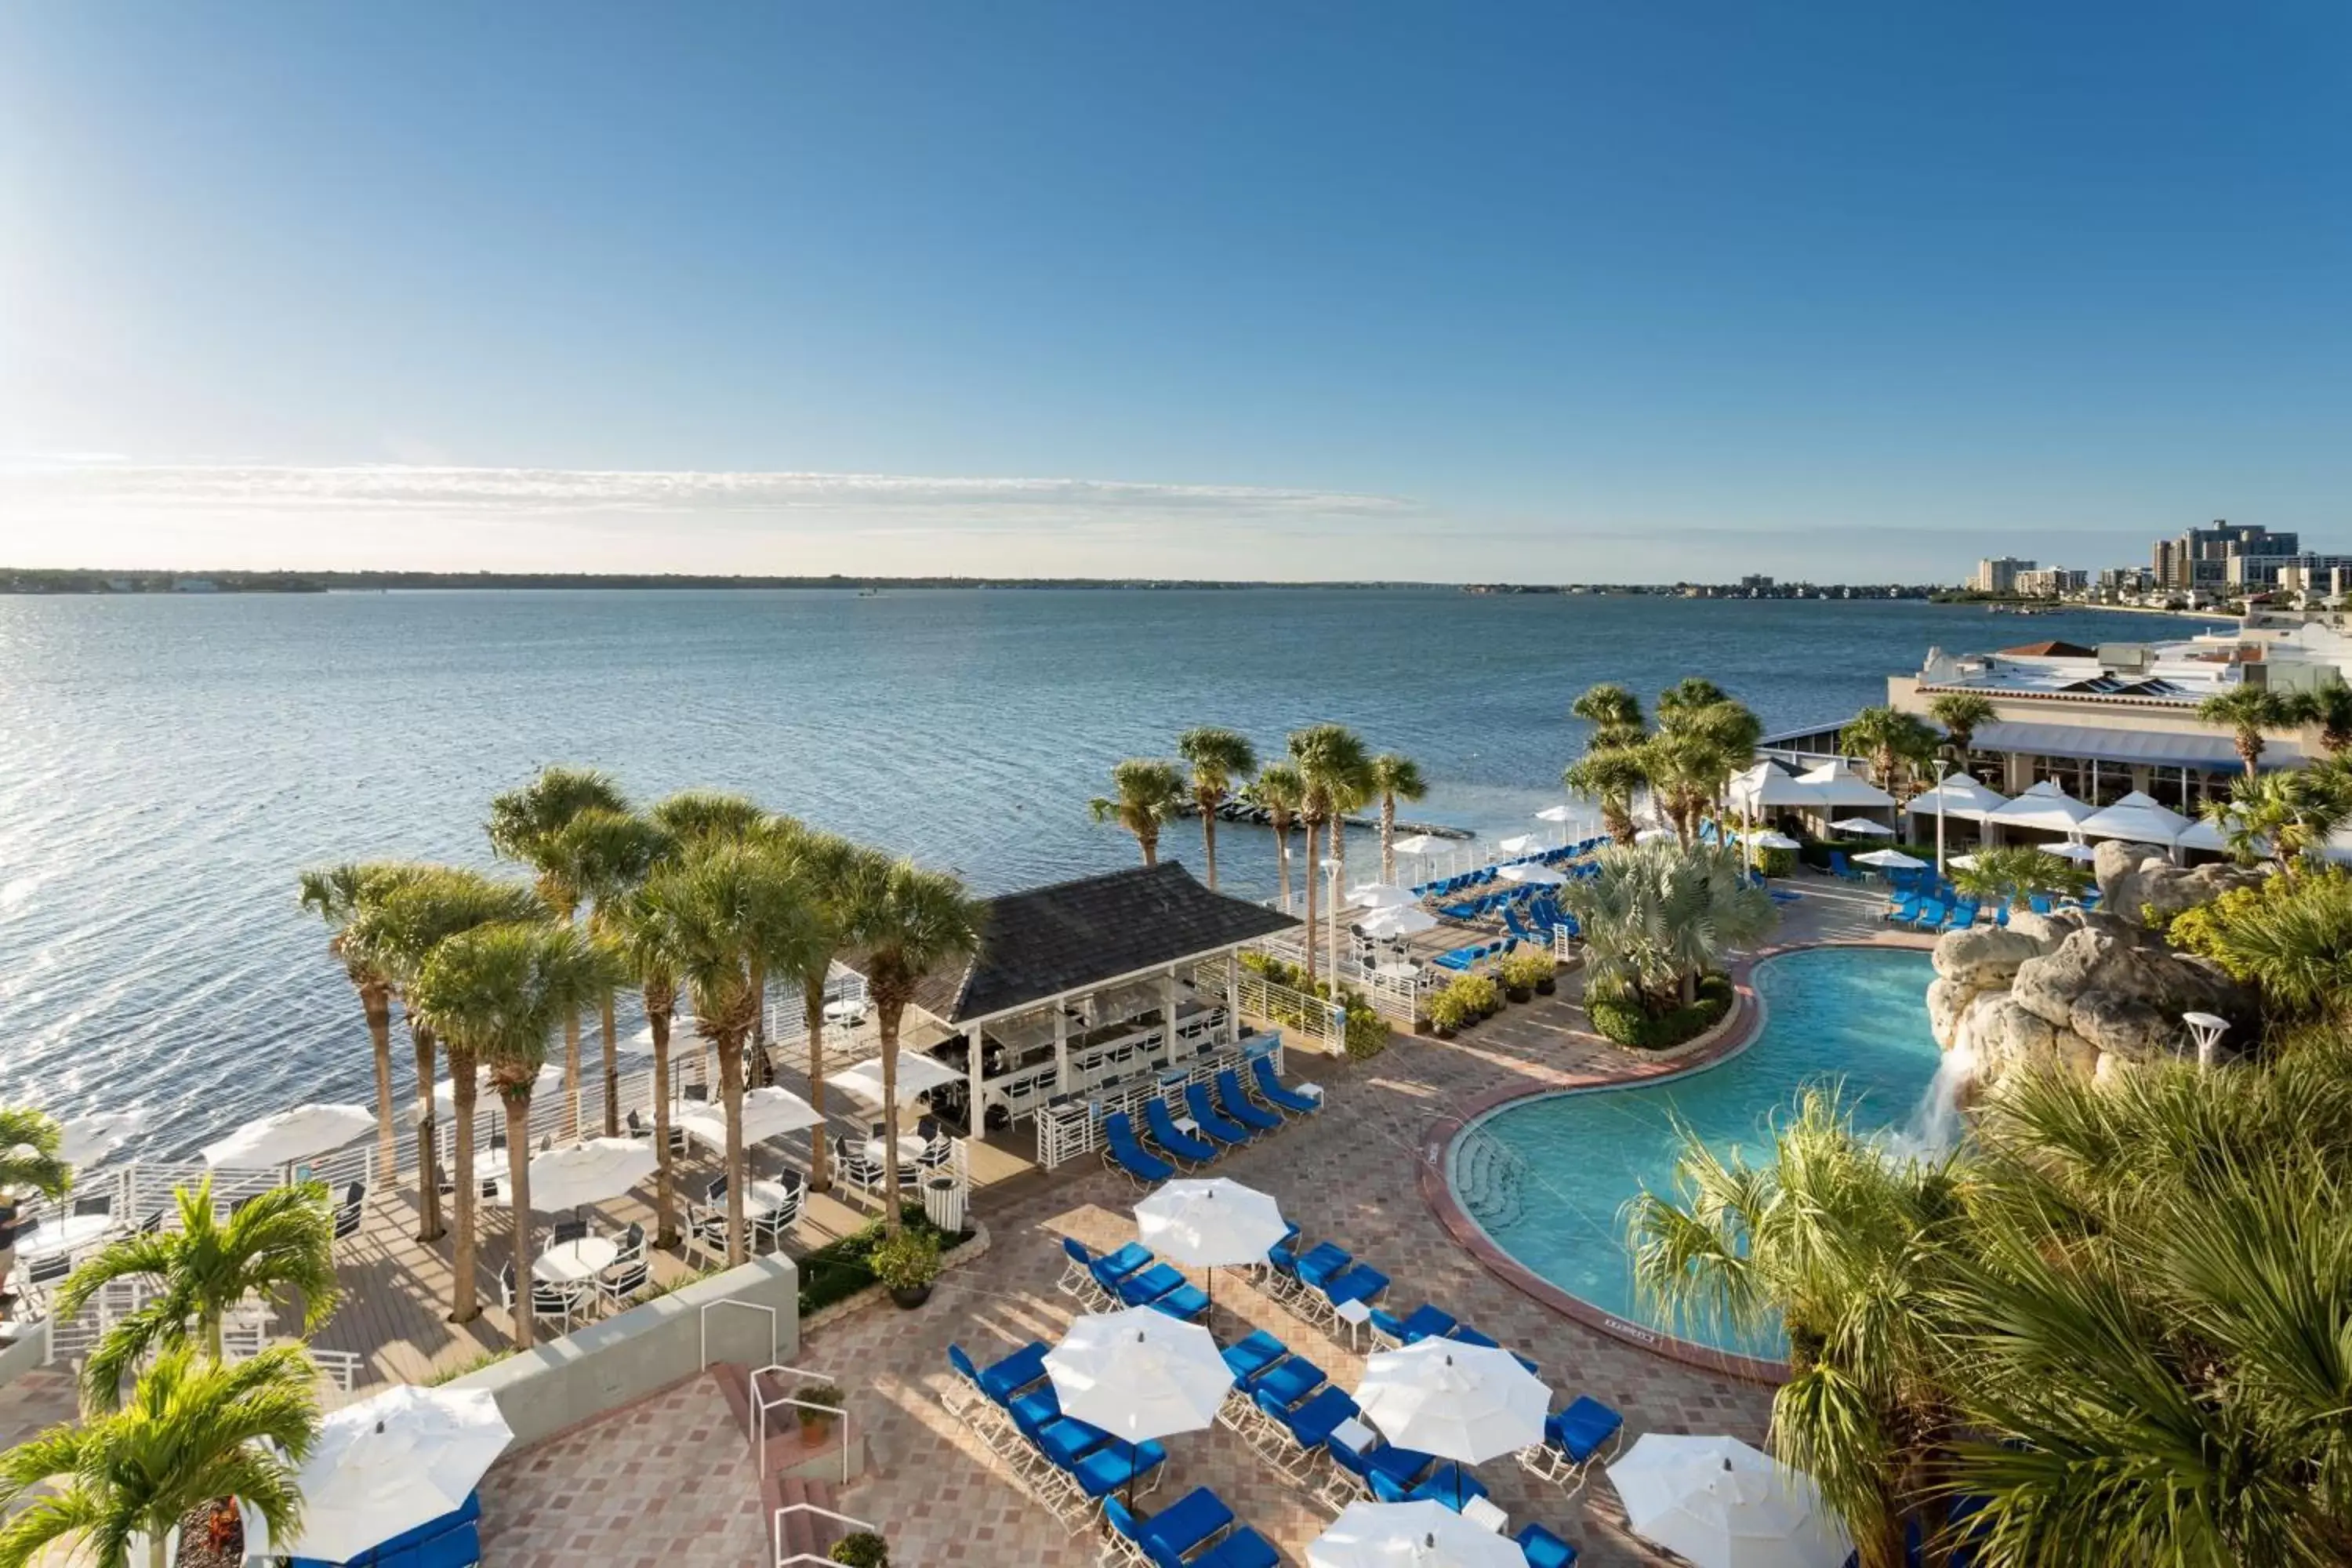 Property building, Pool View in Clearwater Beach Marriott Suites on Sand Key